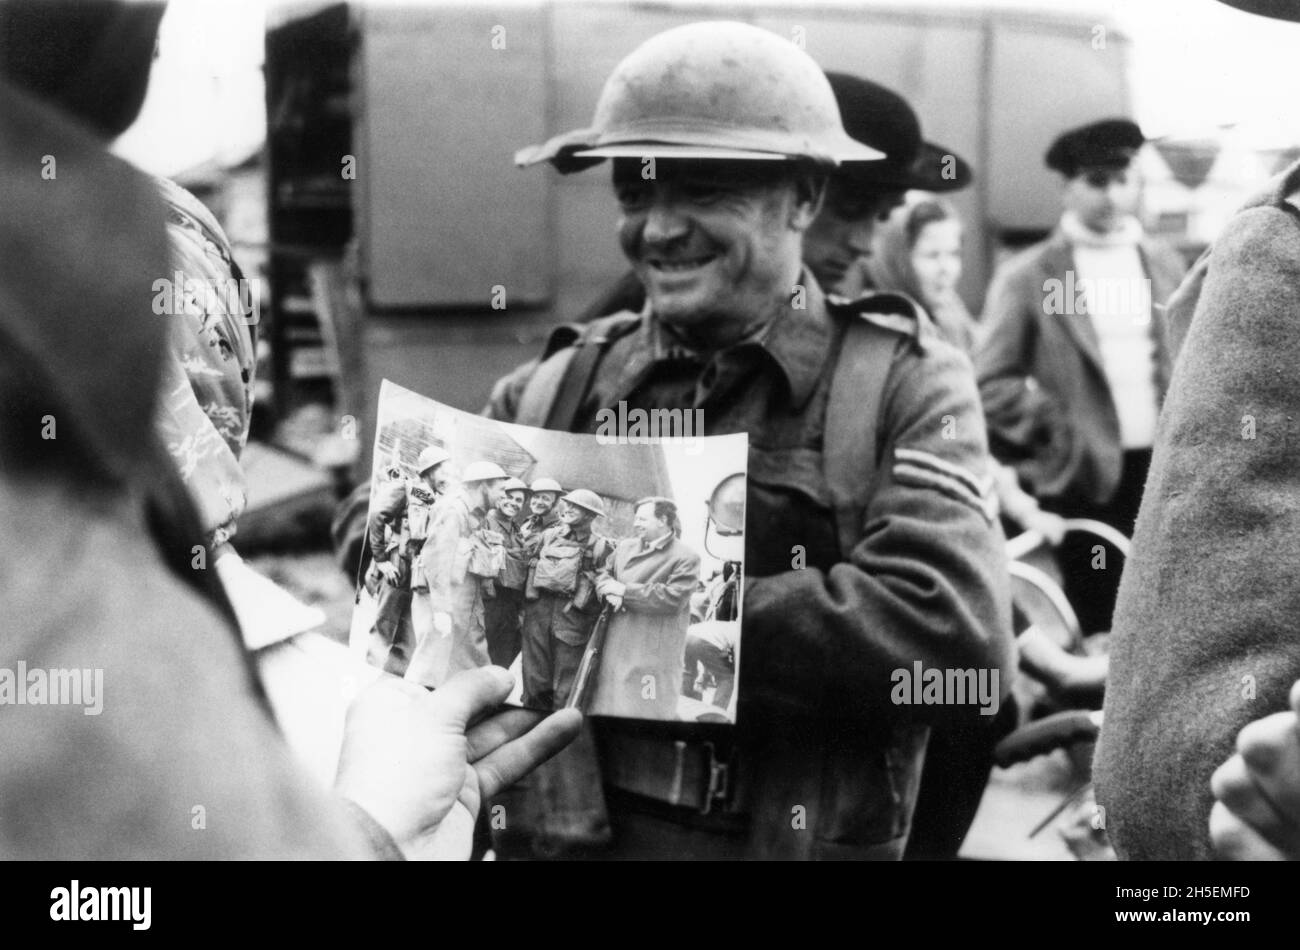 JOHN MILLS on set location candid in Rye, East Sussex England during filming of DUNKIRK 1958 director LESLIE NORMAN music Malcolm Arnold producer Michael Balcon Ealing Studios / Metro Goldwyn Mayer Stock Photo